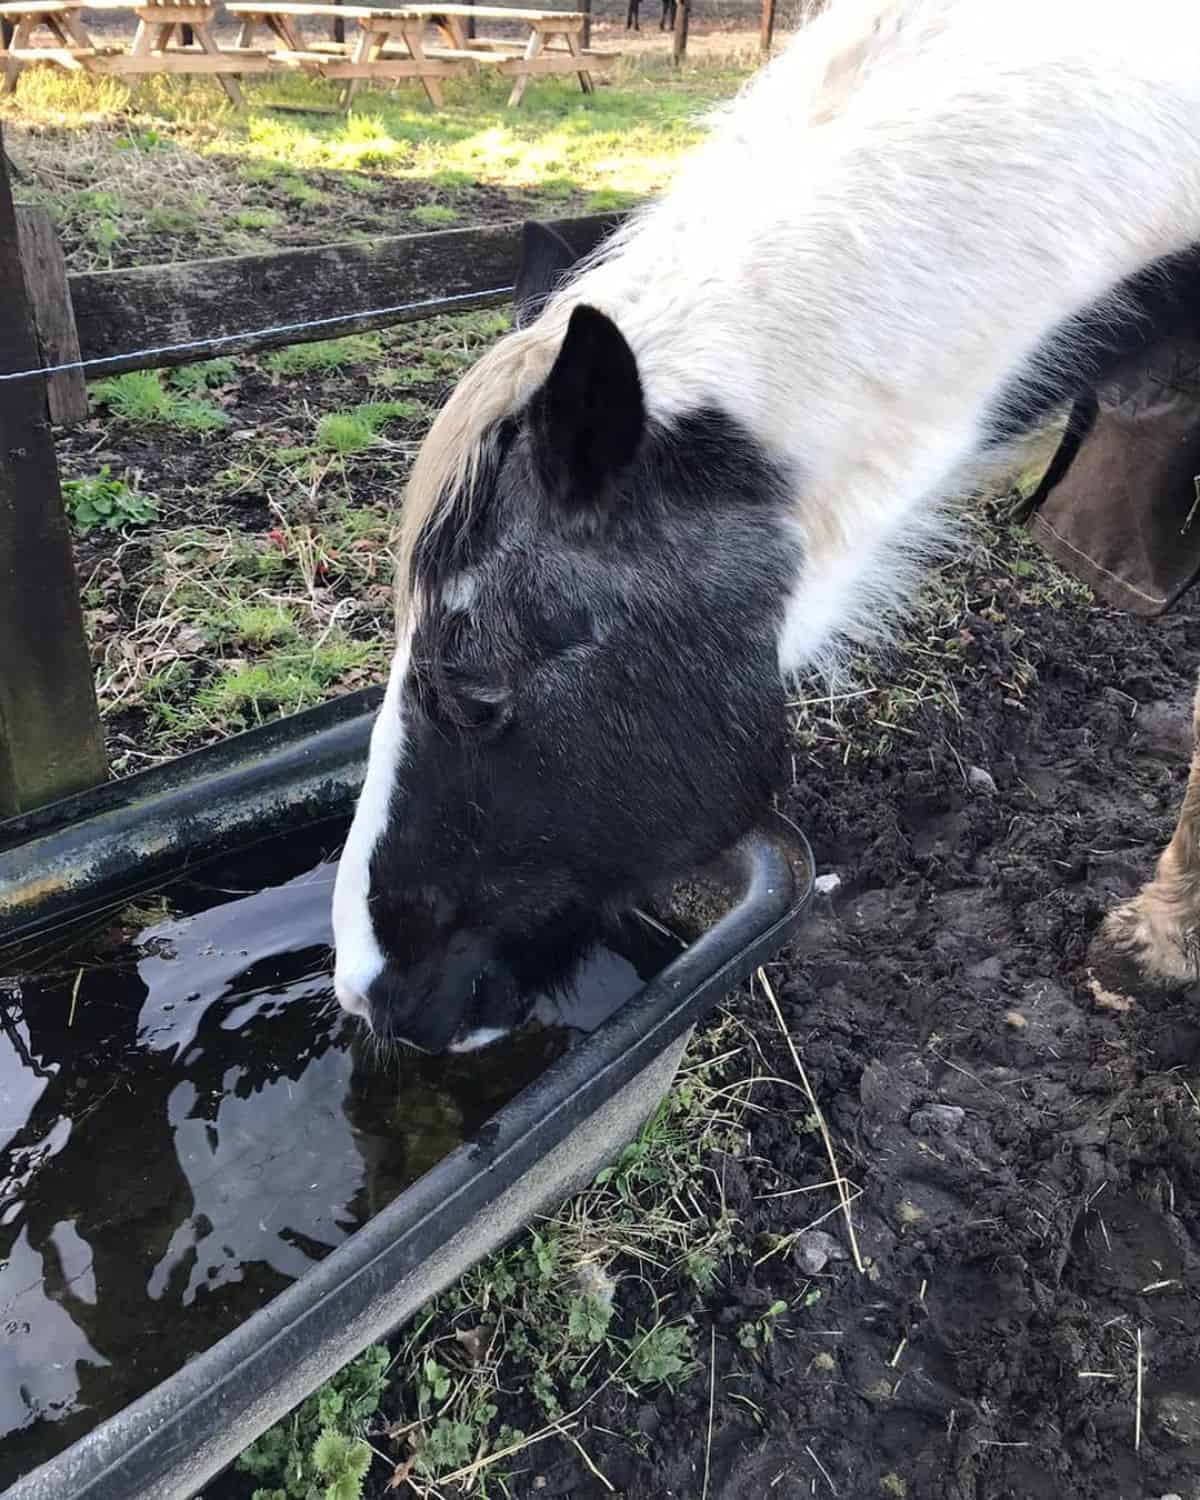 A black-white horse drinking water from a water storage.